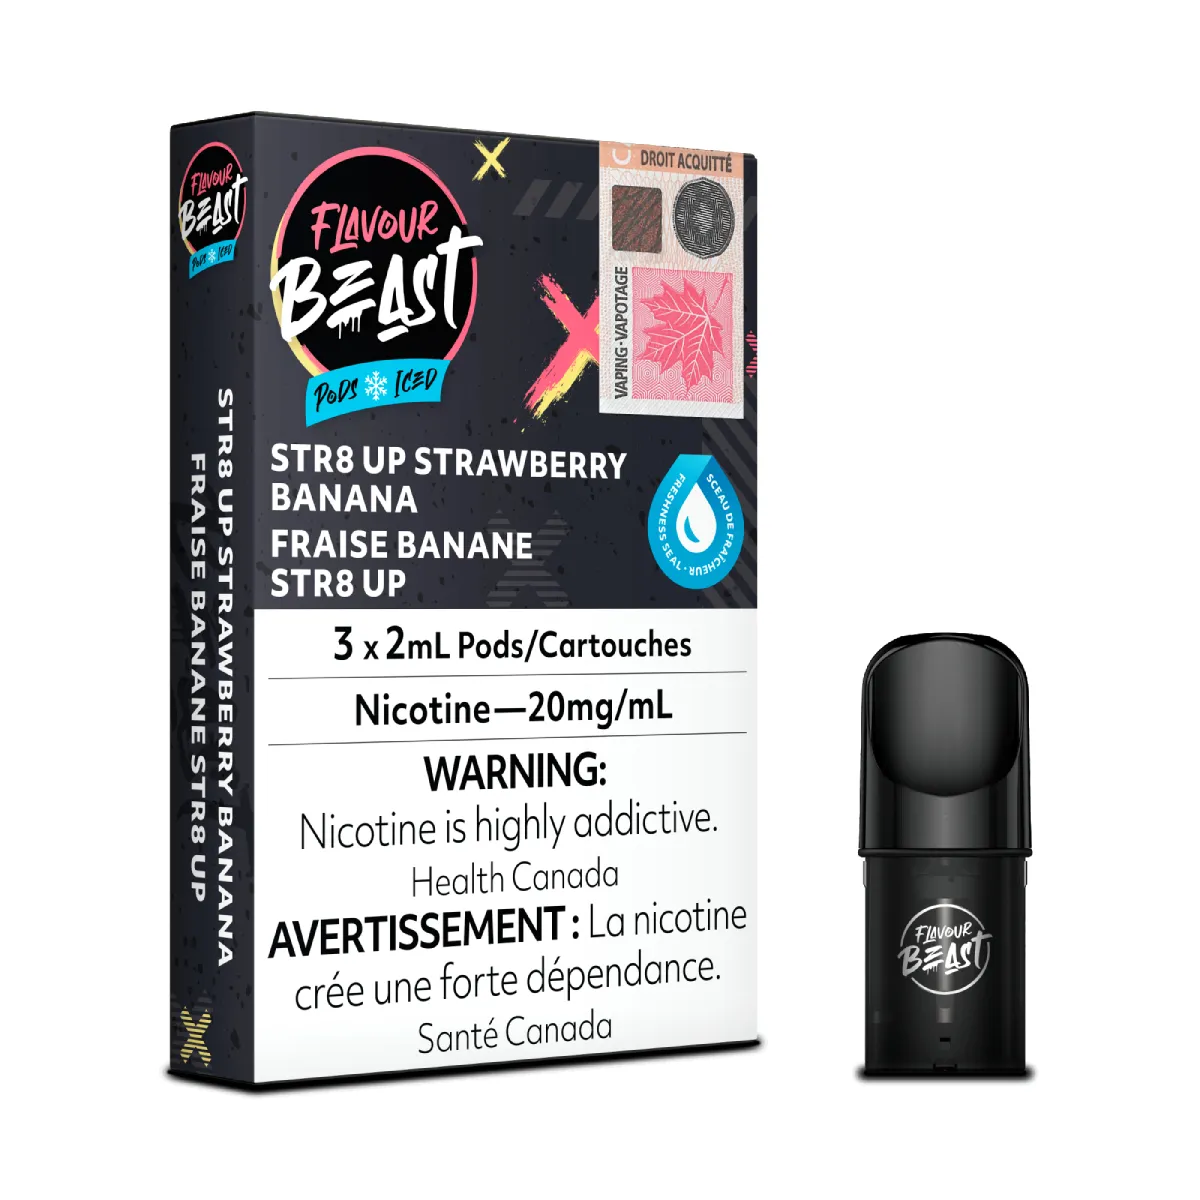 Flavour Beast Pods - STR8 Up Strawberry Banana Iced (3Pk)